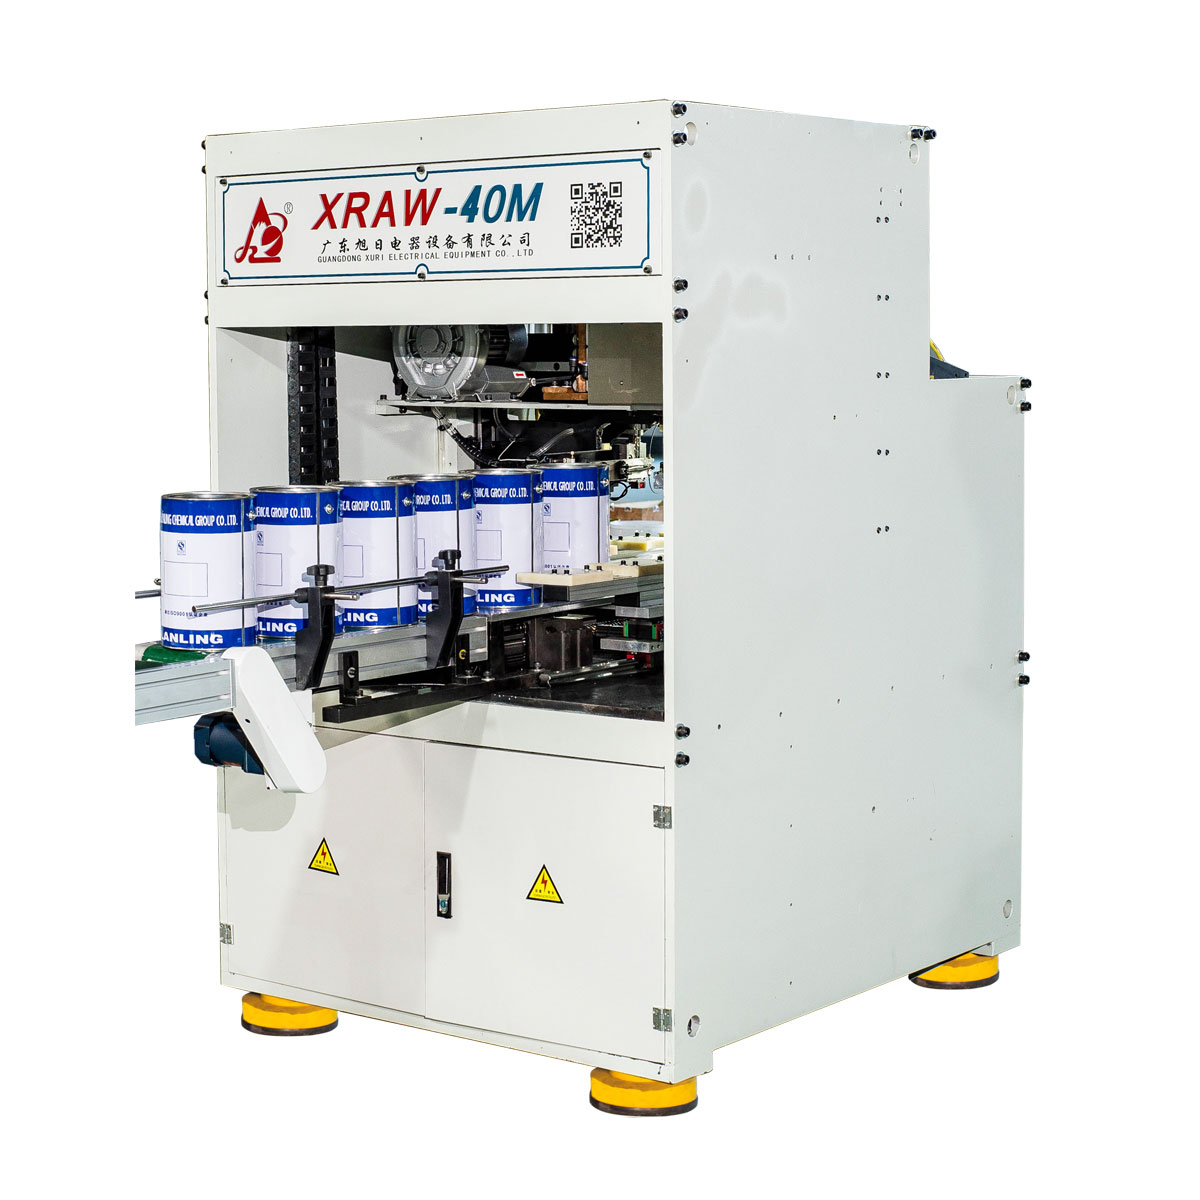  XRAW-40M medium frequency ear welding equipment for small round tanks